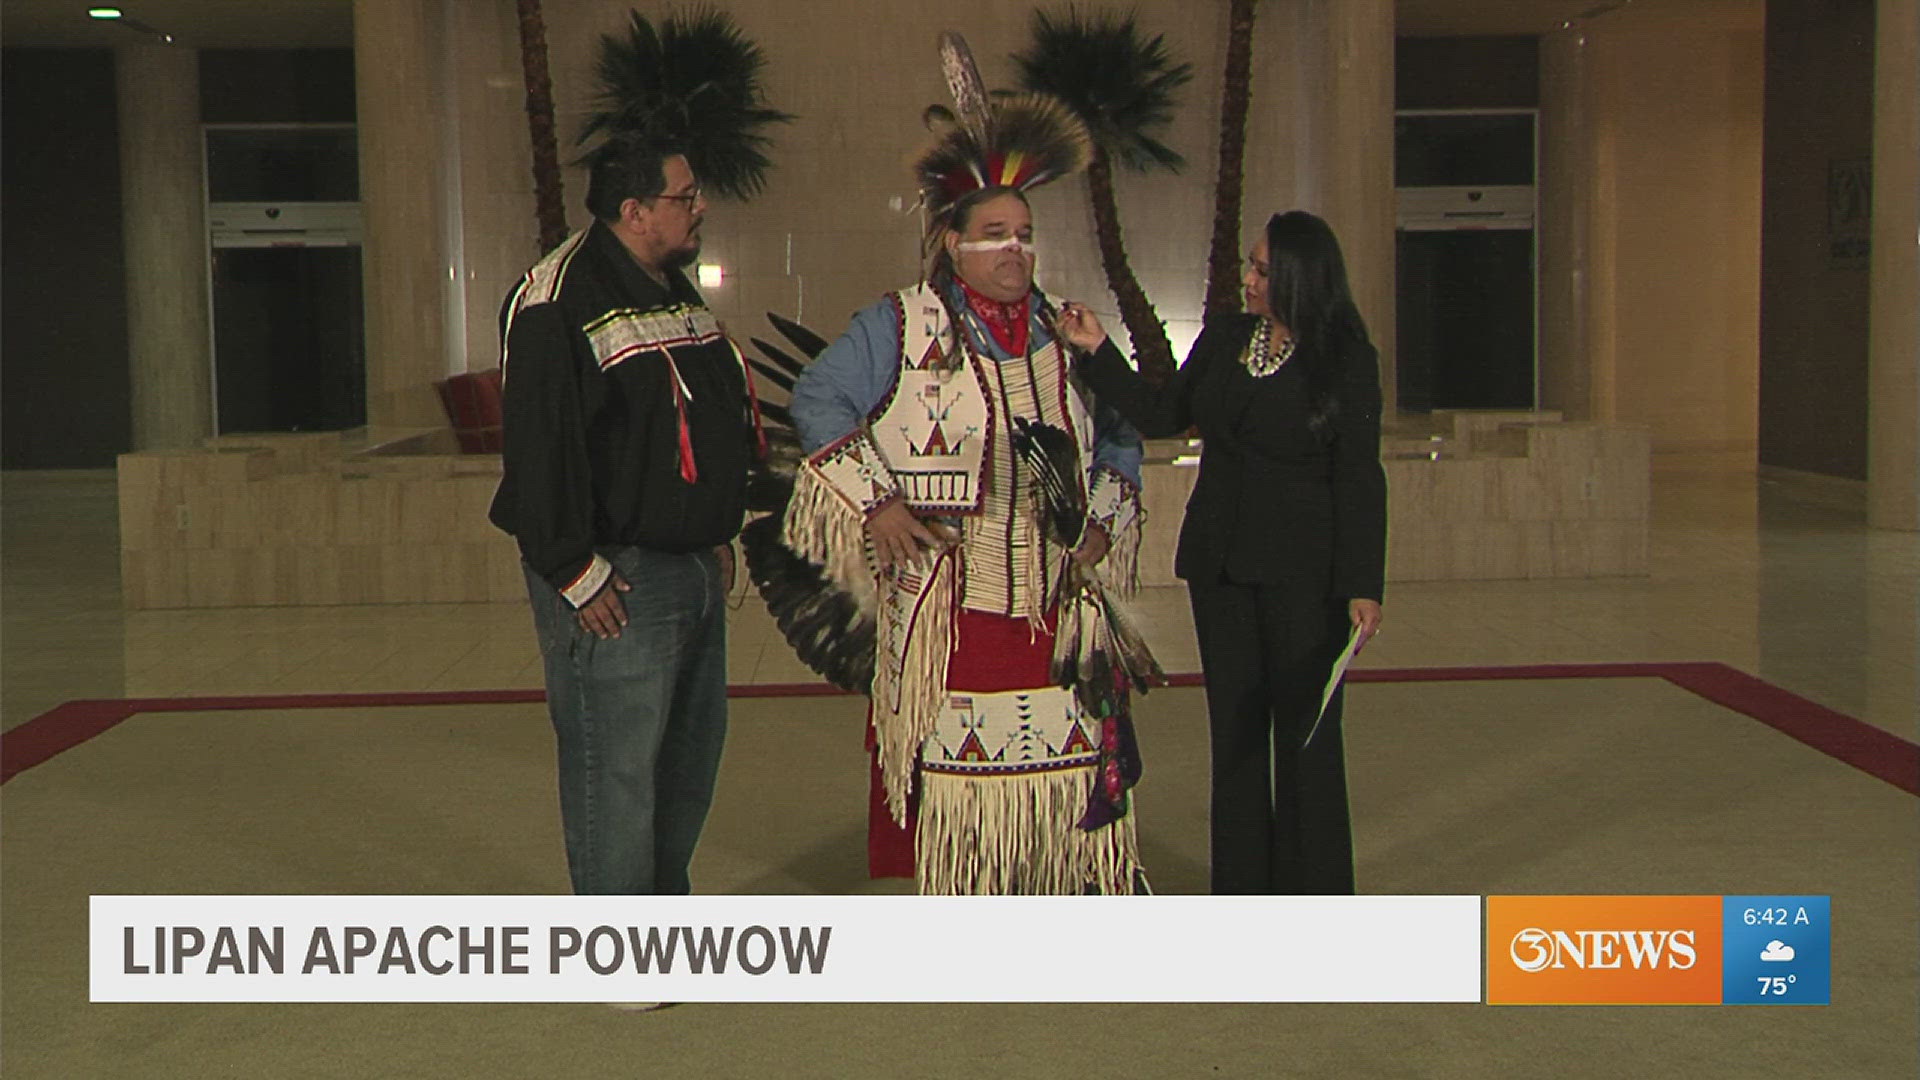 This is the very first traditional Native American Powwow in Corpus Christi in over 25 years.